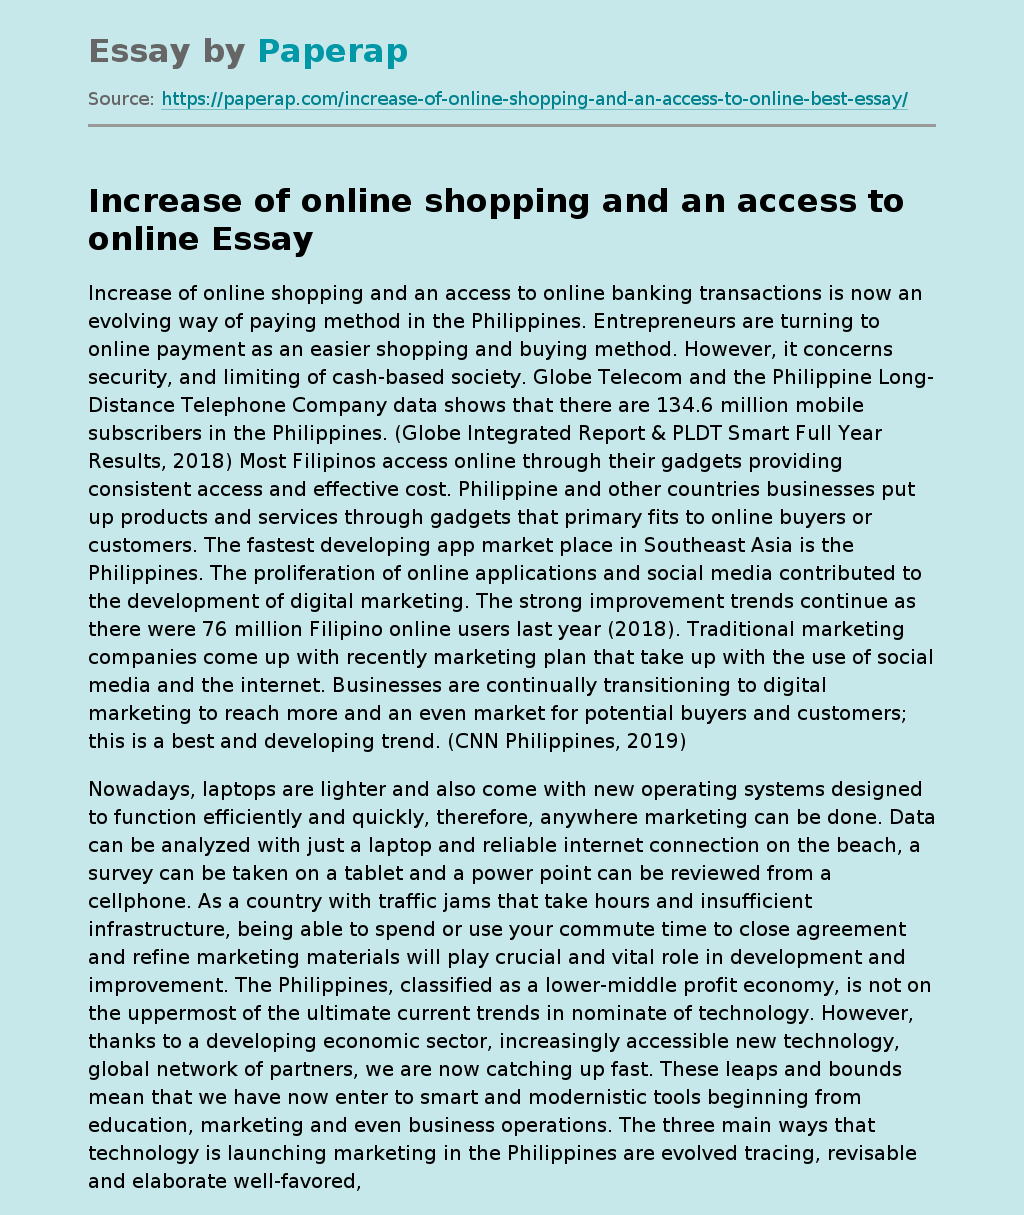 Increase of online shopping and an access to online